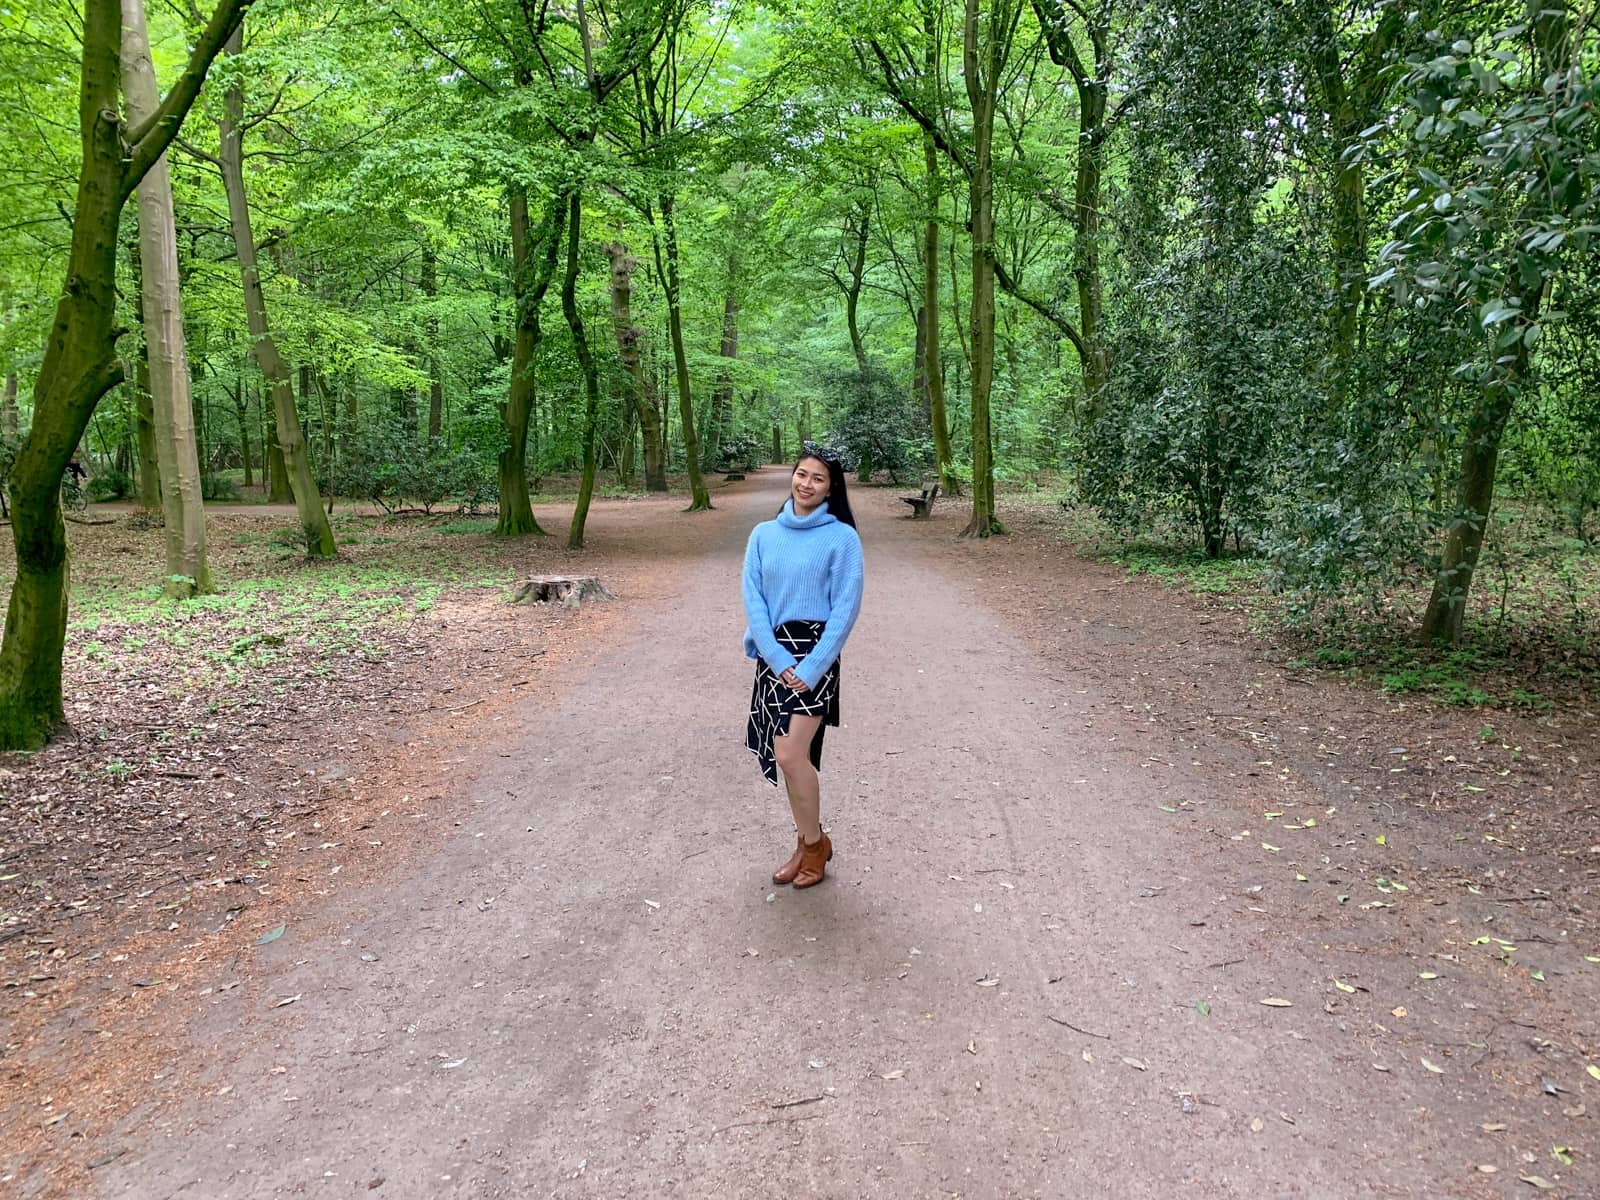 A woman in a light blue sweater and black-and-white patterned layered skirt. She’s standing on a dirt path in a forest-like area with a lot of lush green trees.